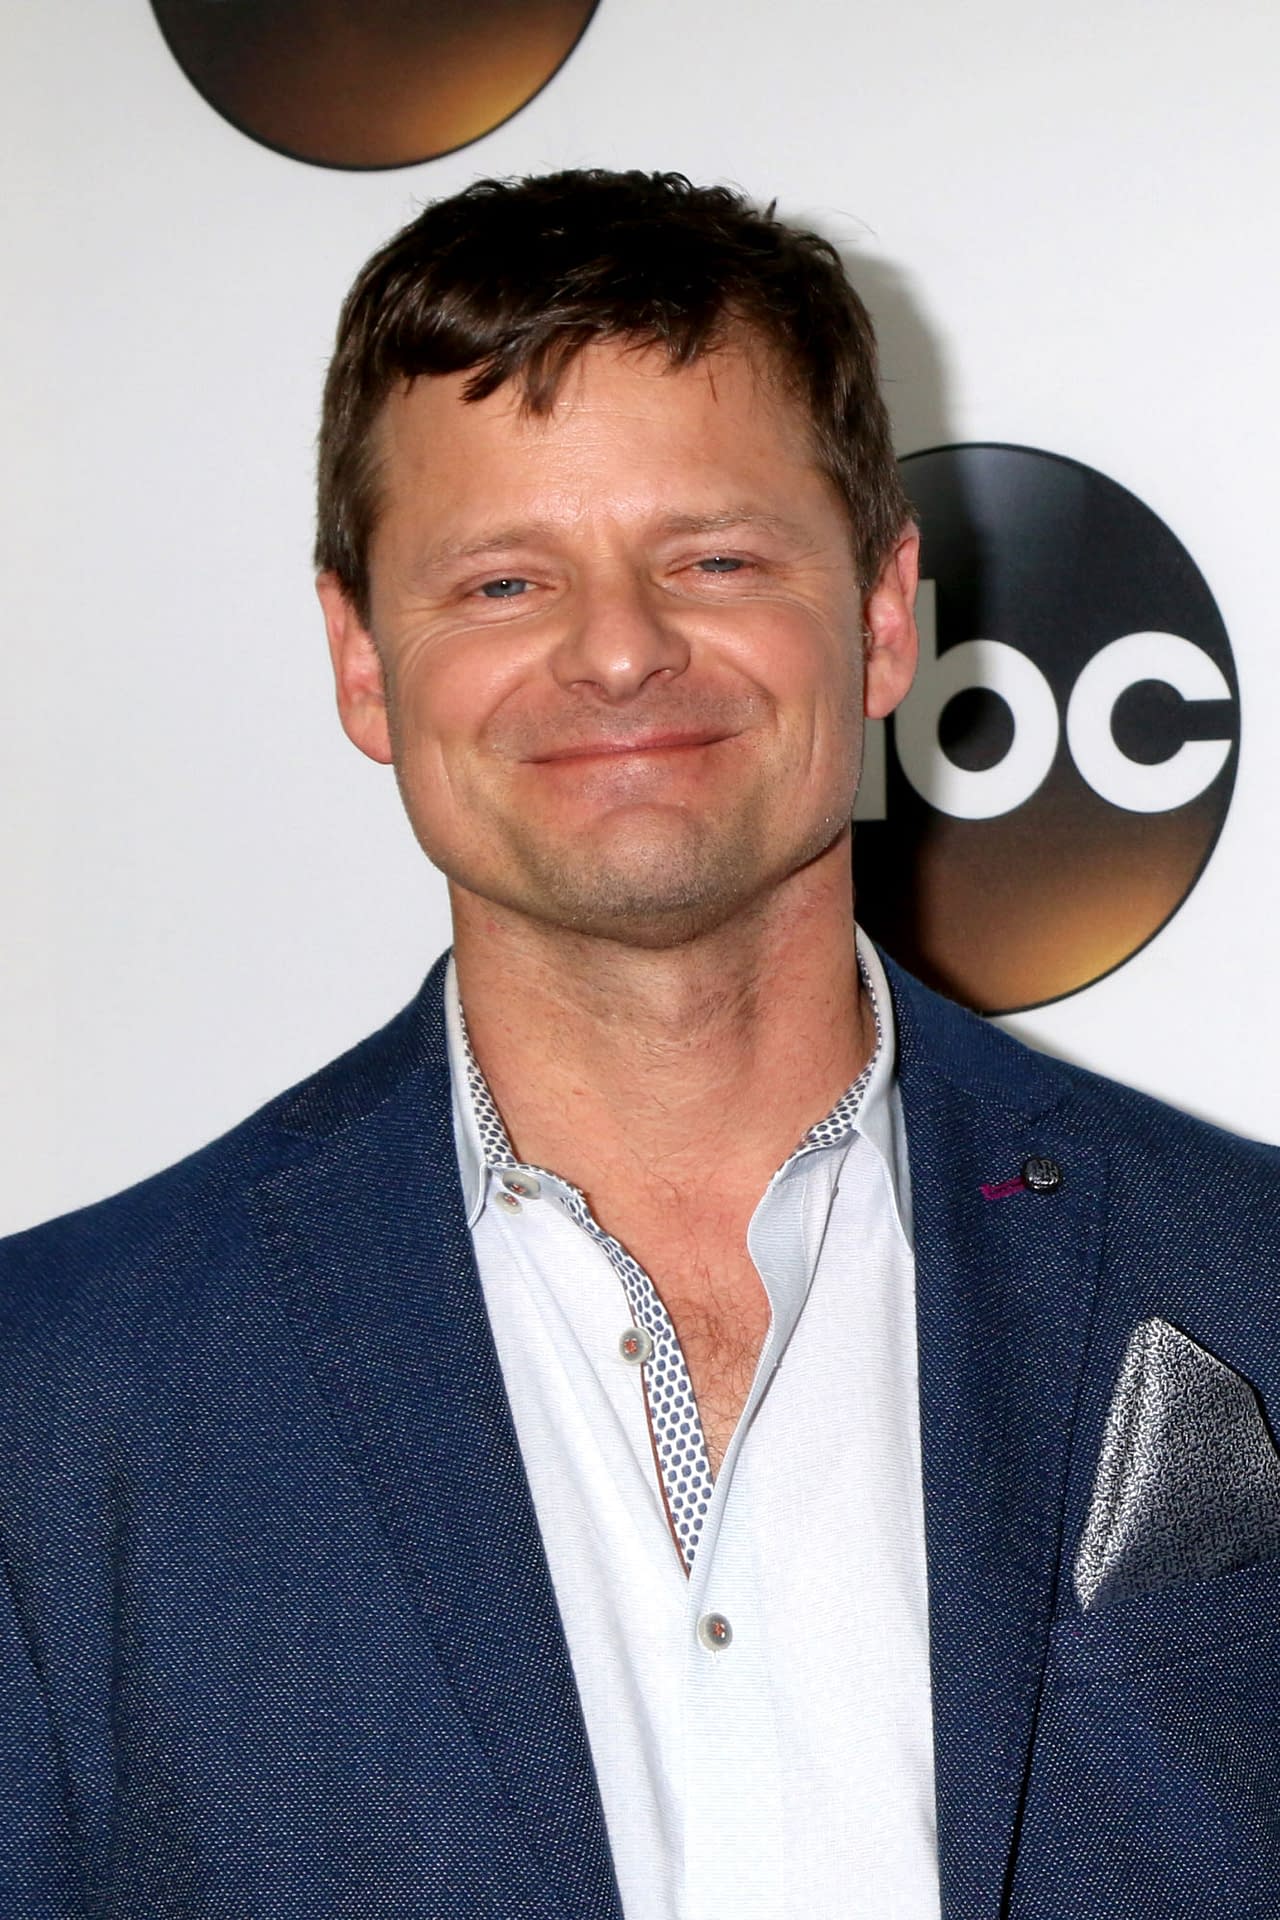 Steve Zahn Escapes of the Apes" for "Gringa"